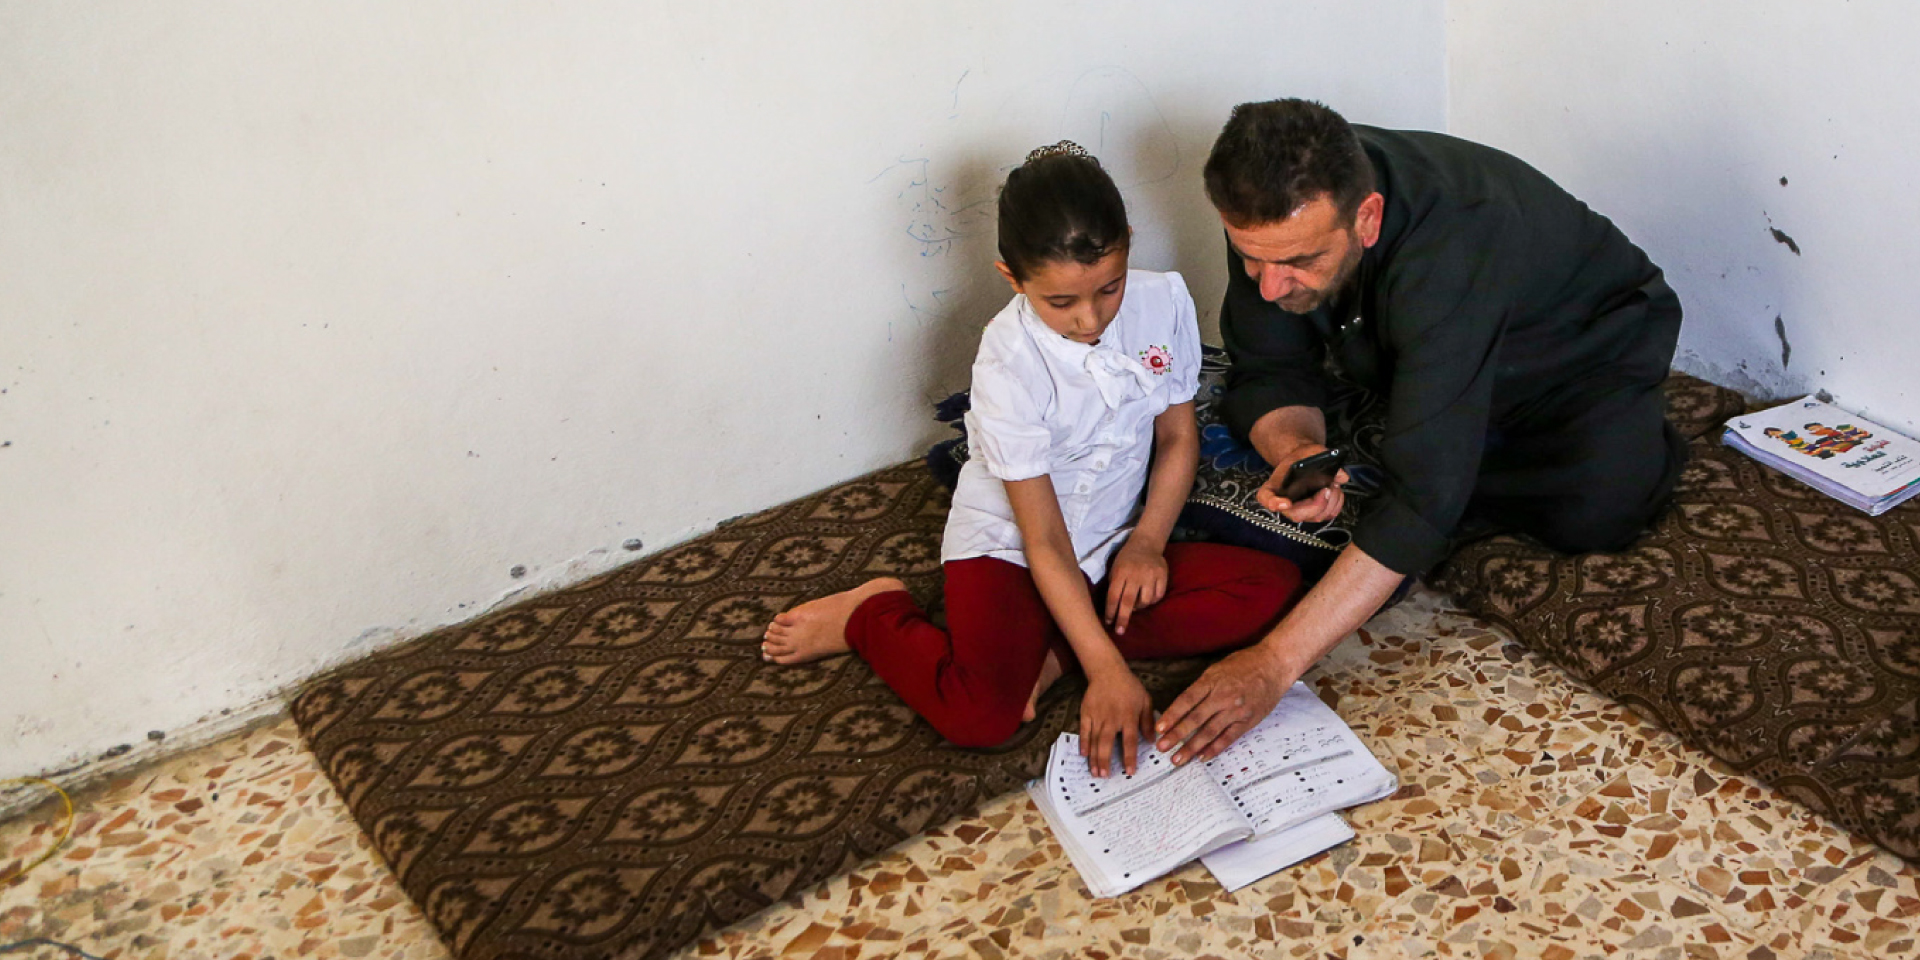 In Northwestern Syria, Rama and her father, Fadi, use his smartphone to watch a virtual Arabic class on WhatsApp, supplemented by textbooks.